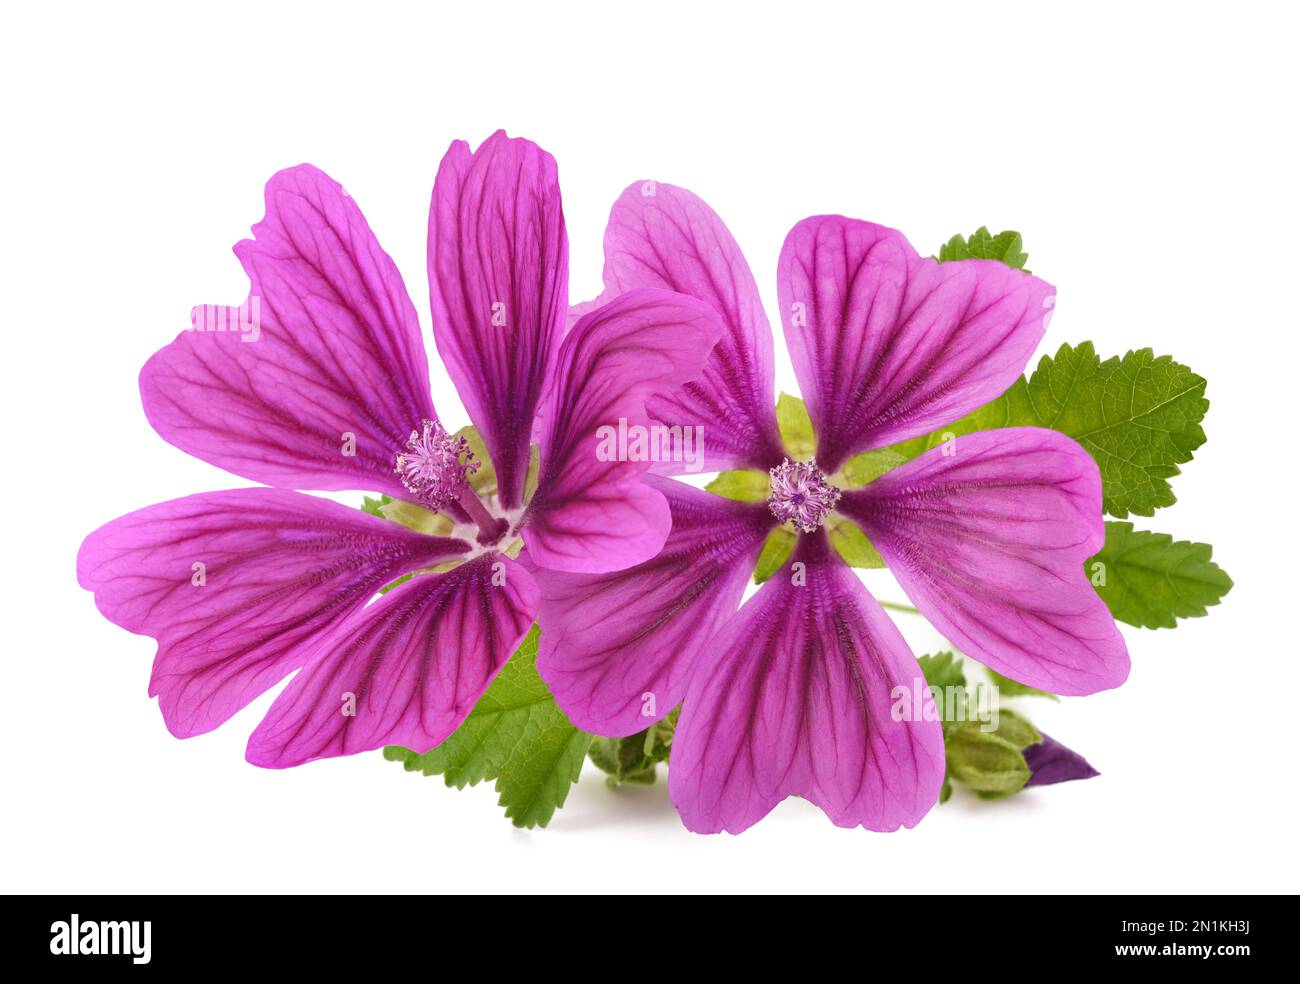 Mallow plant with flowers isolated on white background Stock Photo